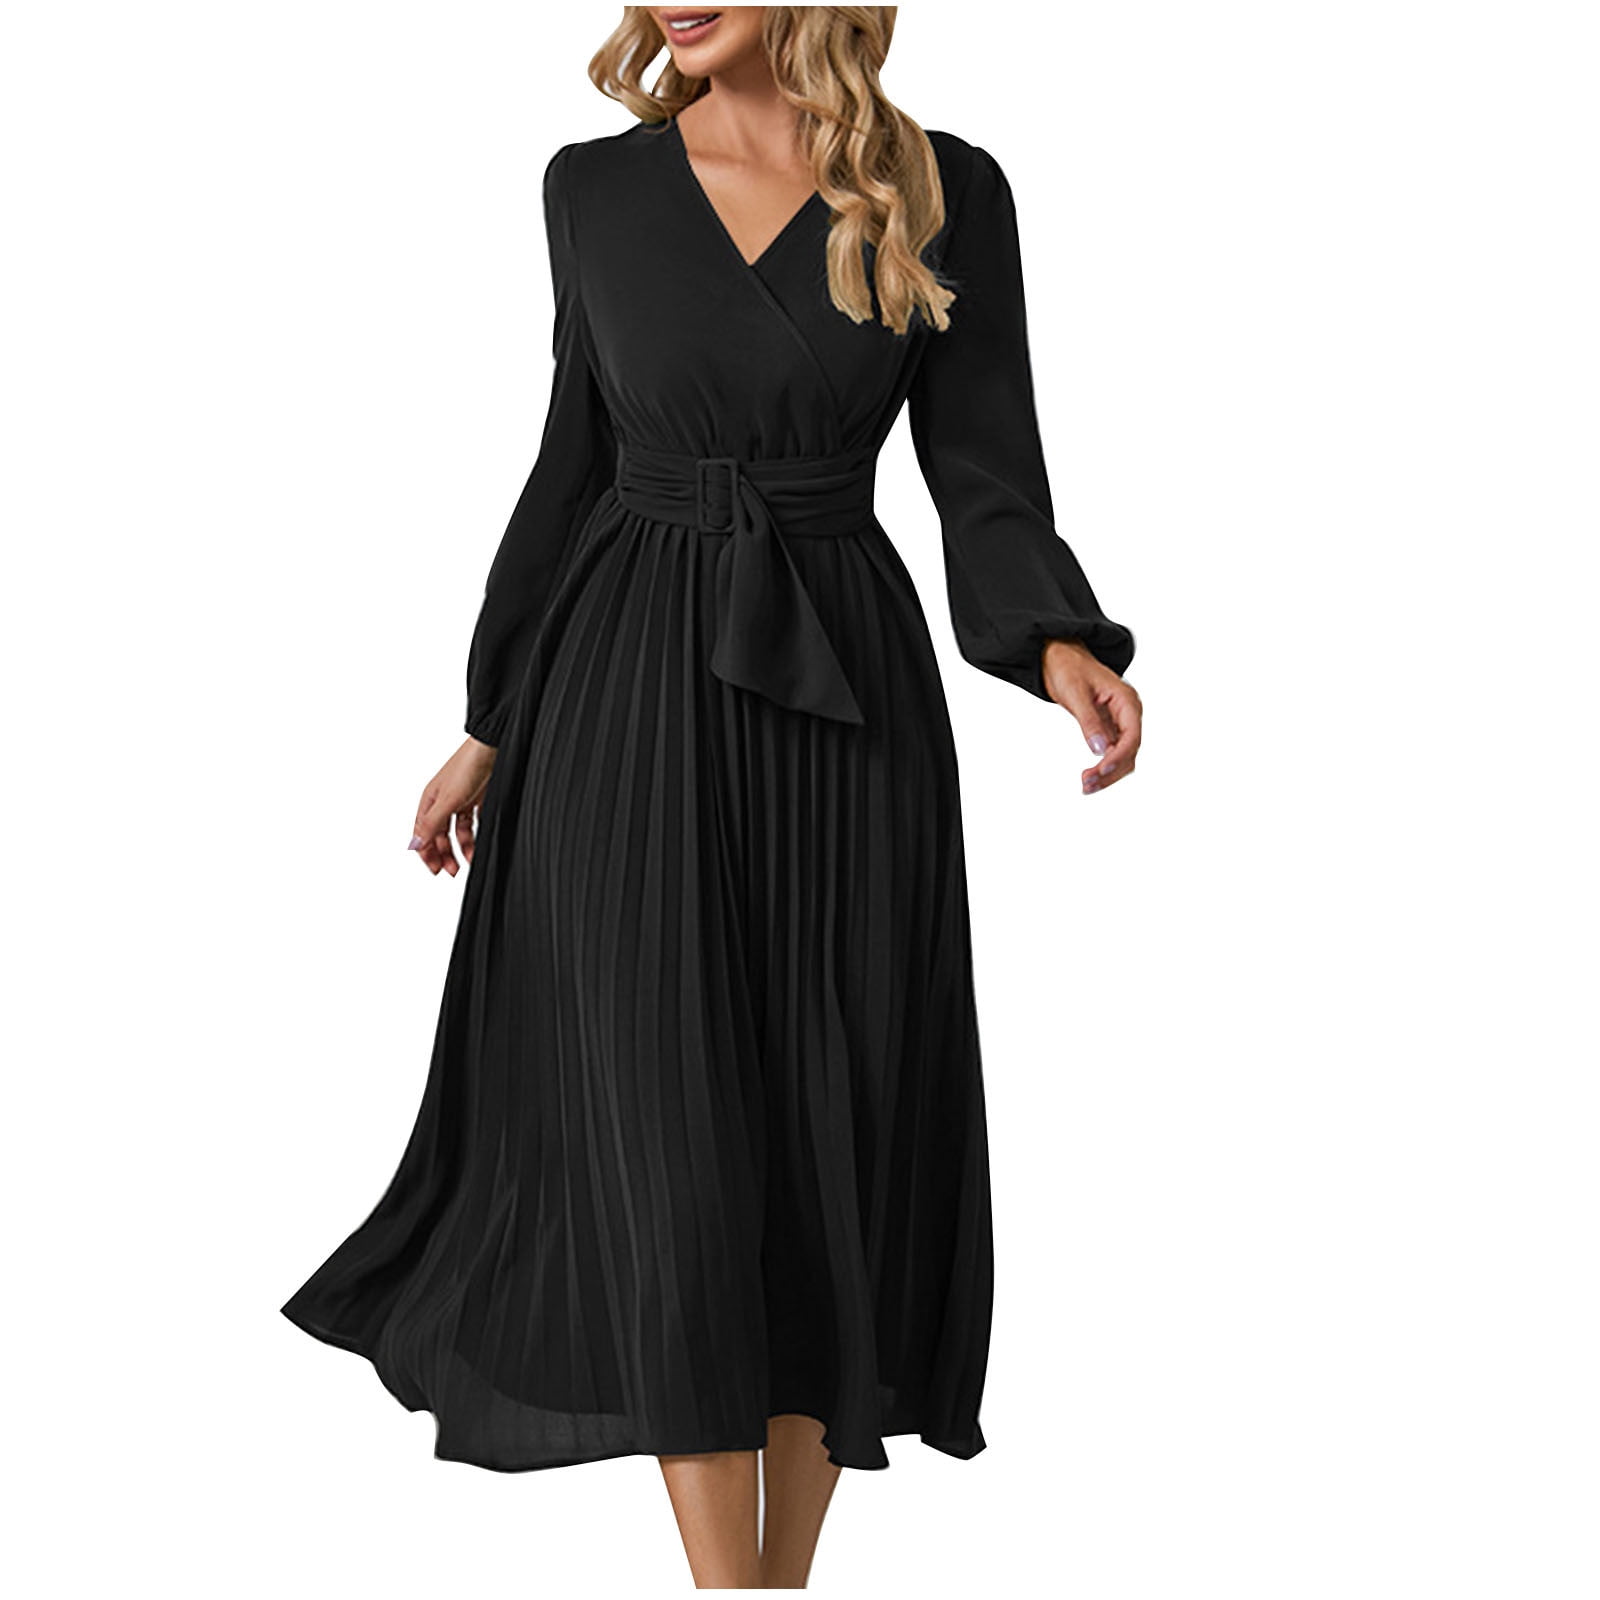 dresses for funeral